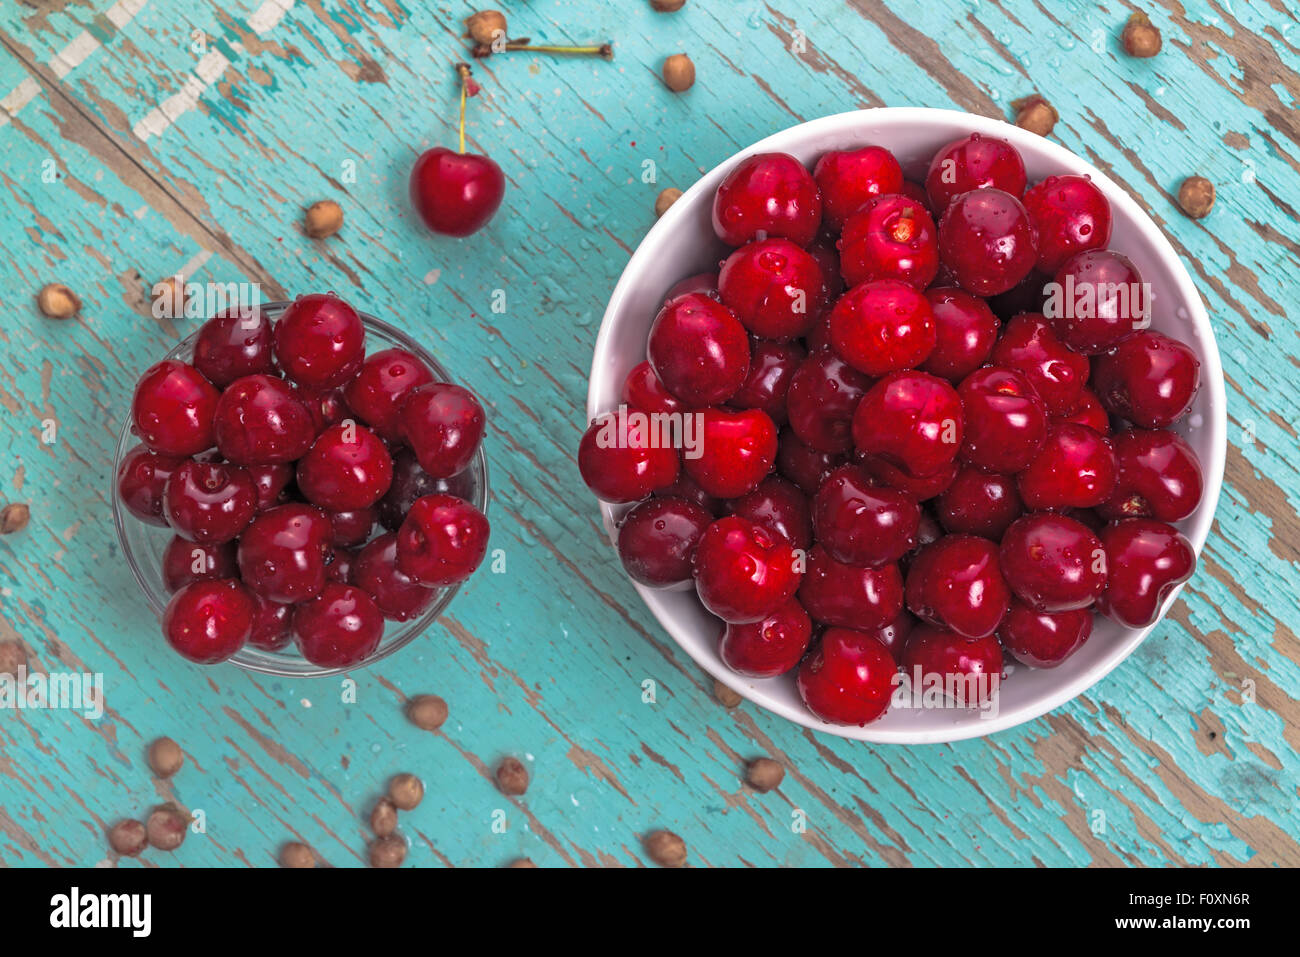 Sweet Cherry in Bowl on Rustic Table, Ripe Fresh Wild Cherries Fruit and Cherry Pits, top view Stock Photo